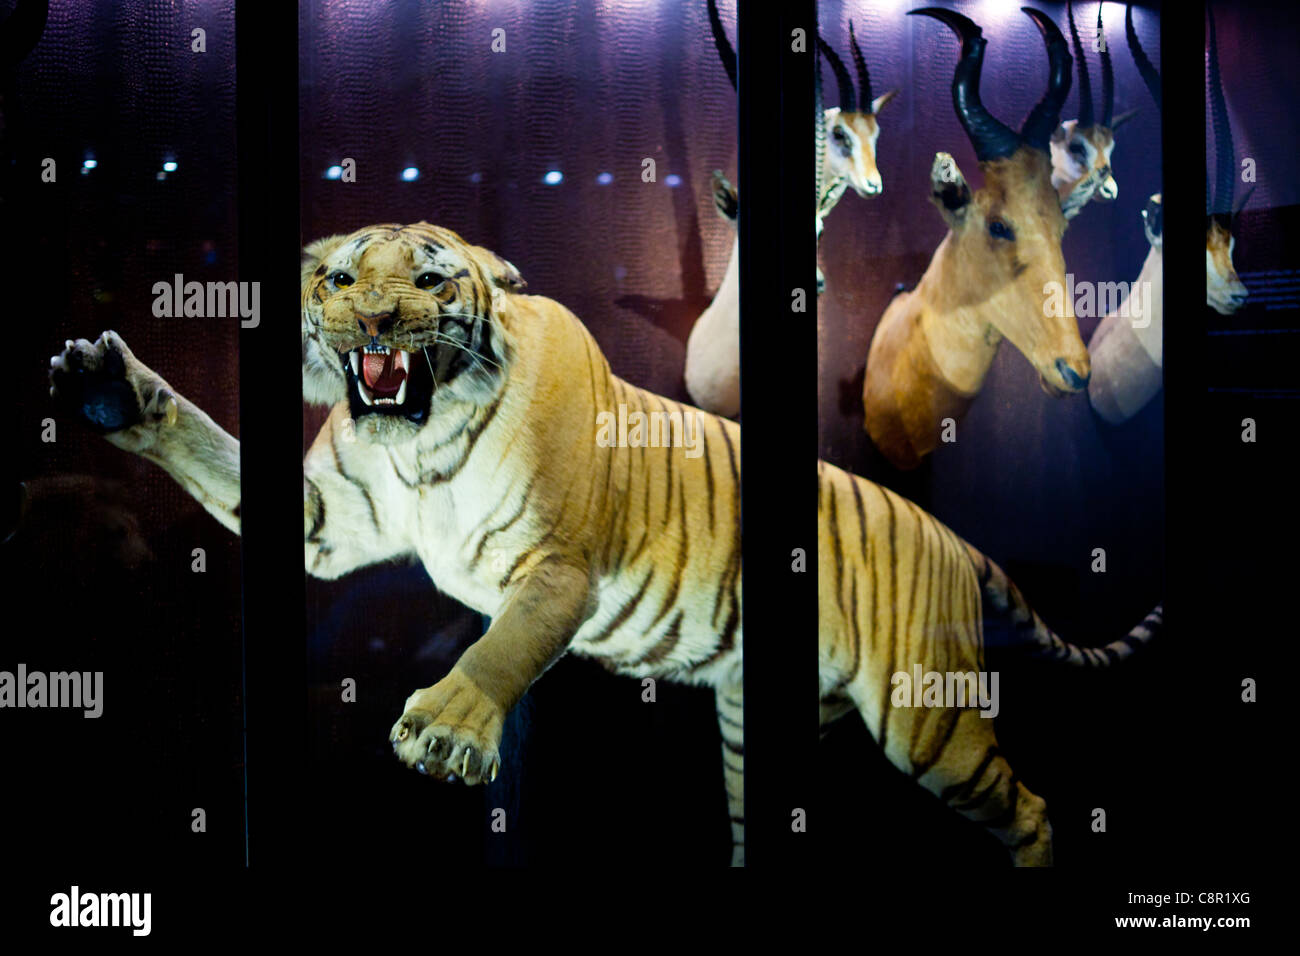 A stuffed tiger in a display case at Manchester Museum in the UK Stock Photo